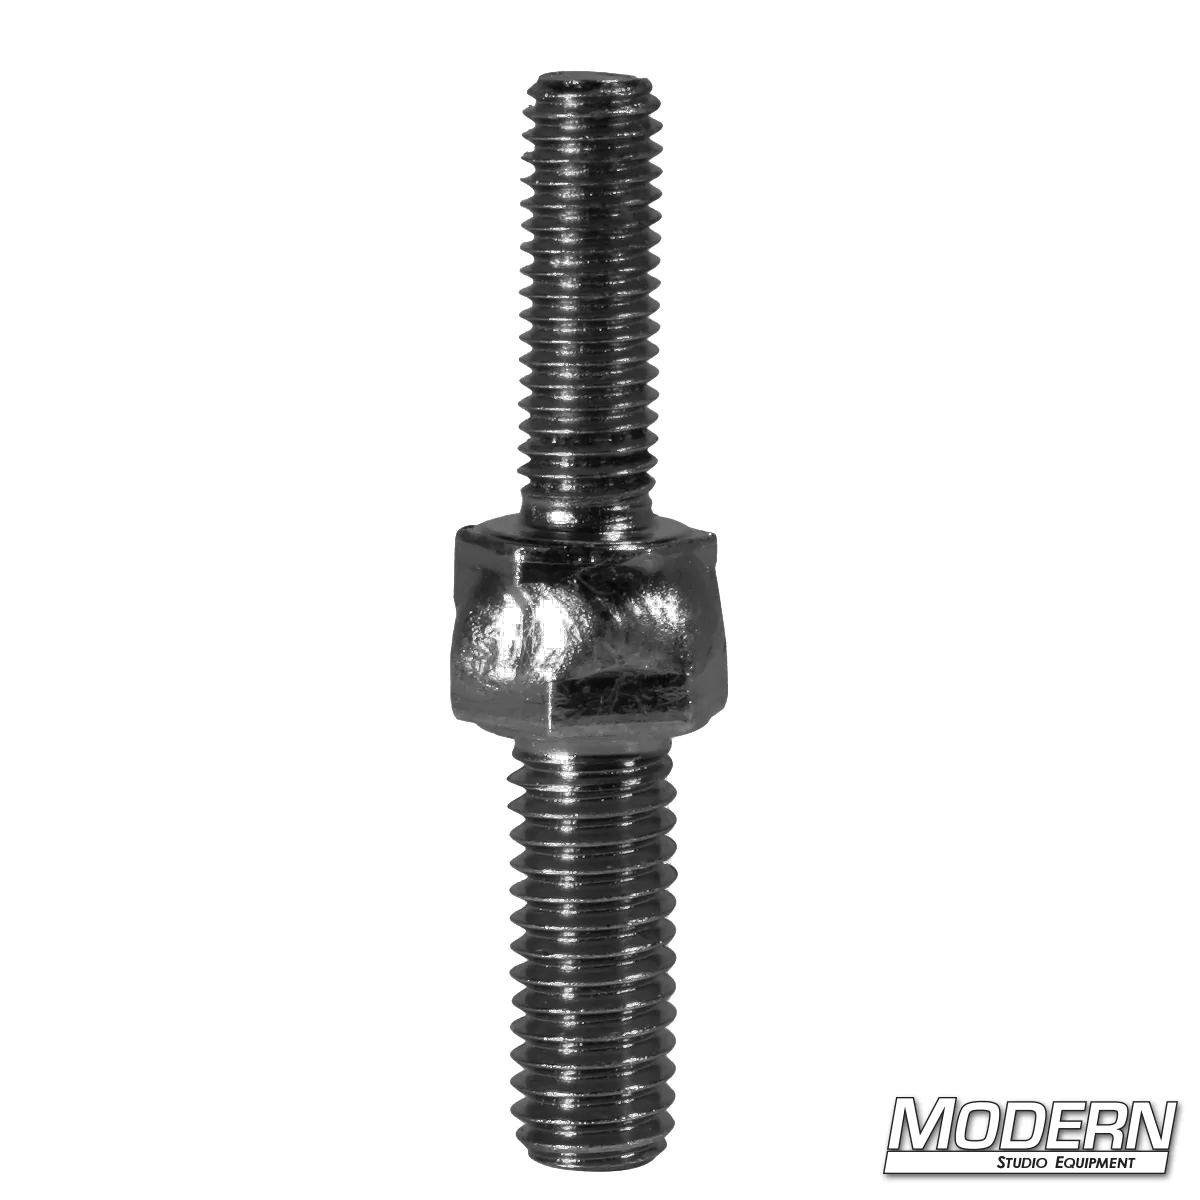 Body Starter Metric to S.A.E. Bolts - 8mm to 3/8-inch - Black Zinc